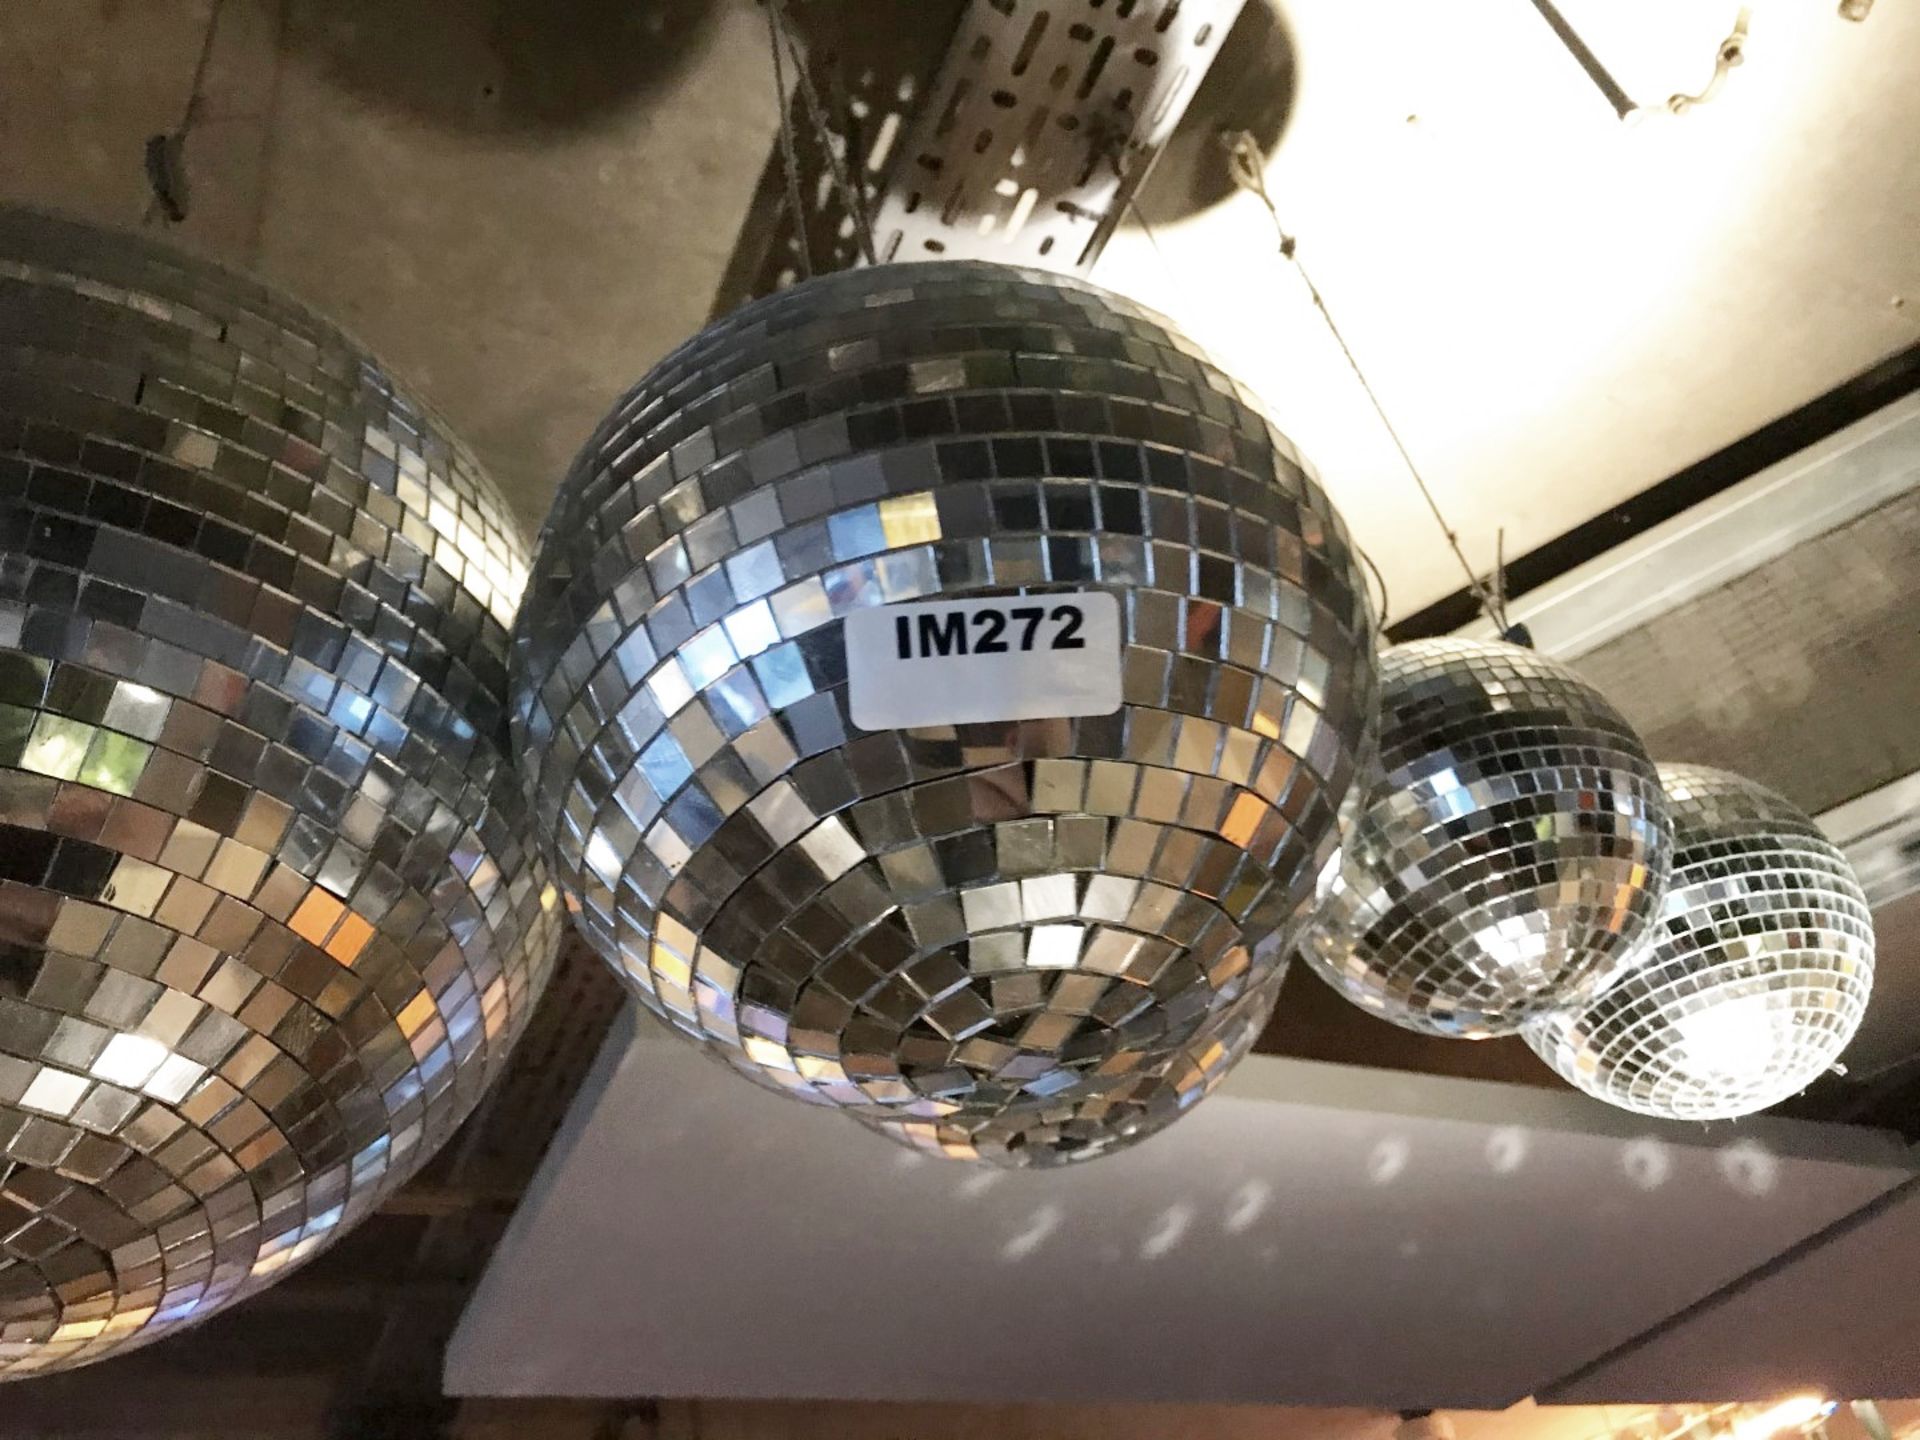 15 x Mirrored Disco Balls - Sizes Range From Small to Large - CL554 - Ref IM272 - Location: London - Image 3 of 3